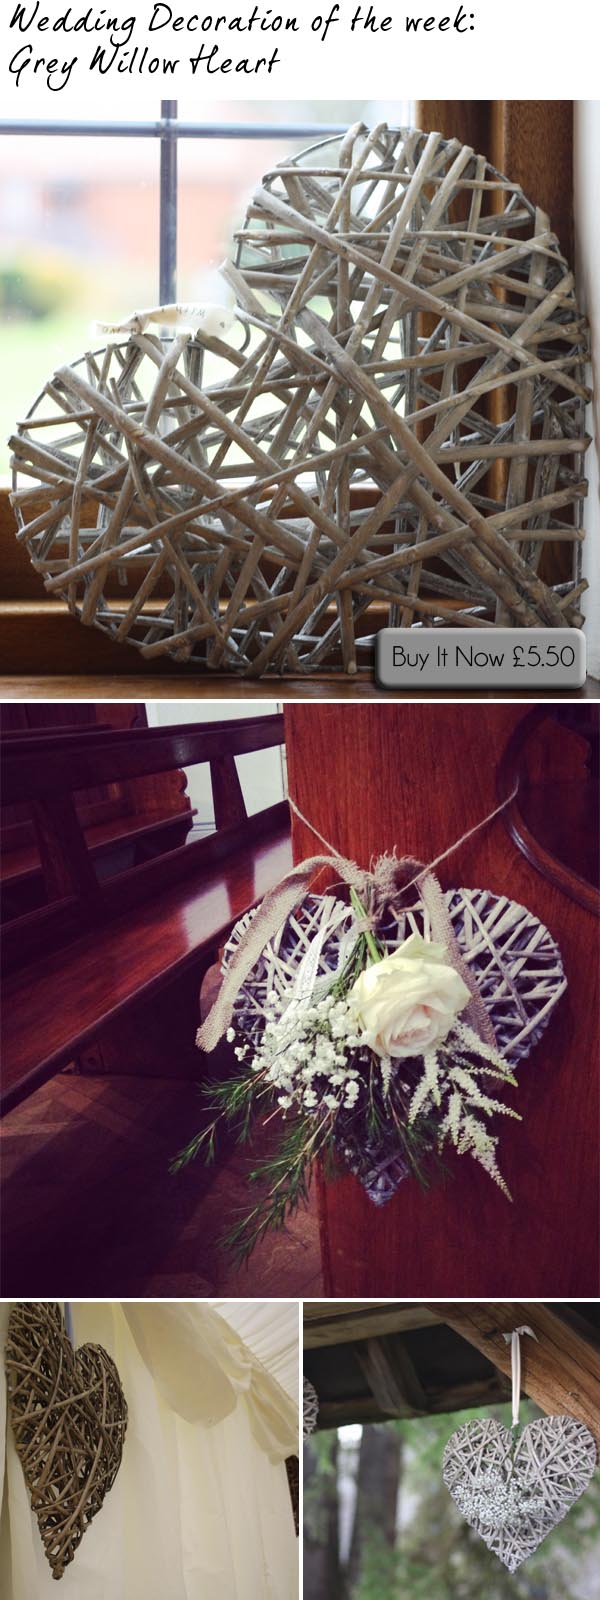 grey willow heart hanging wedding heart pew end